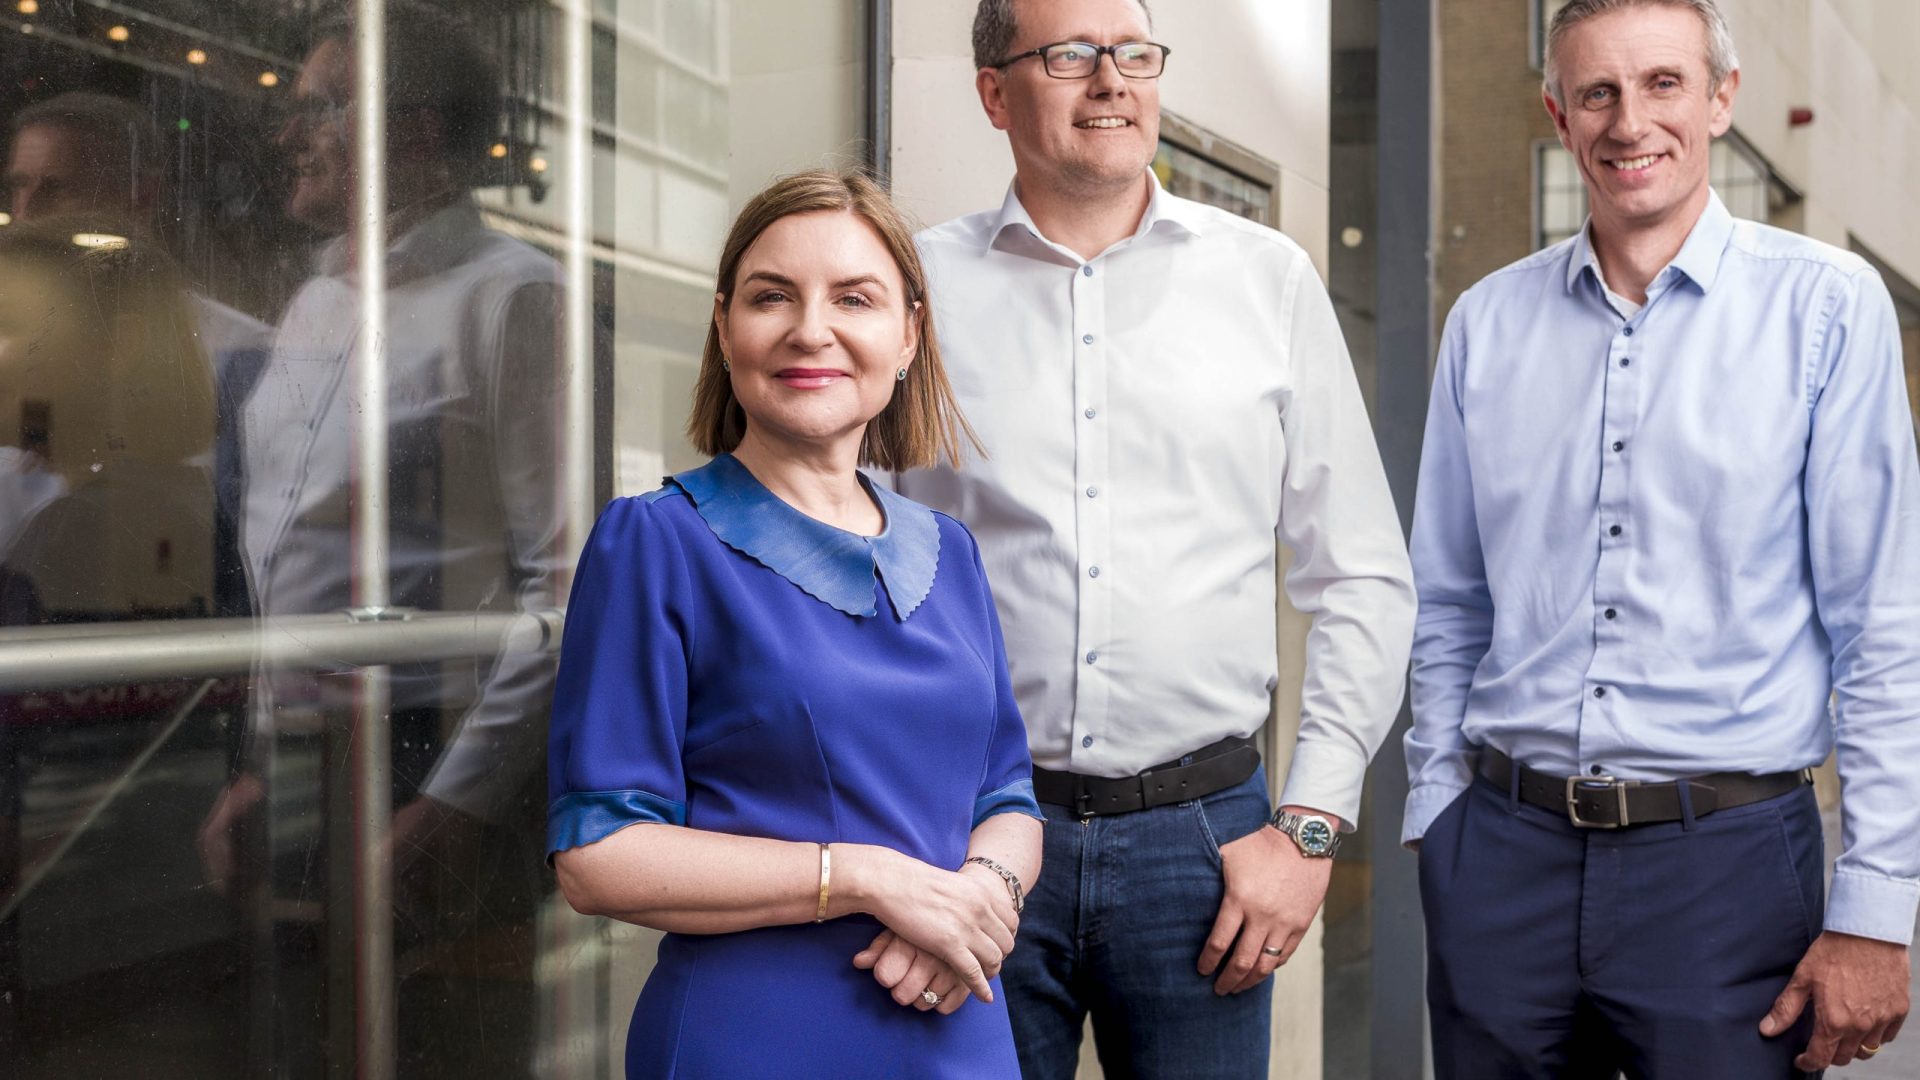 Pictured at the announcement that Granite Digital is expanding into the U.S. market to support its growing global client base and create 50 new jobs are L-R Margaret Molloy, advisor to the Granite Digital board; Robert Carpenter, Chief Commercial Officer of Granite Digital, and Conor Buckley, CEO of Granite Digital